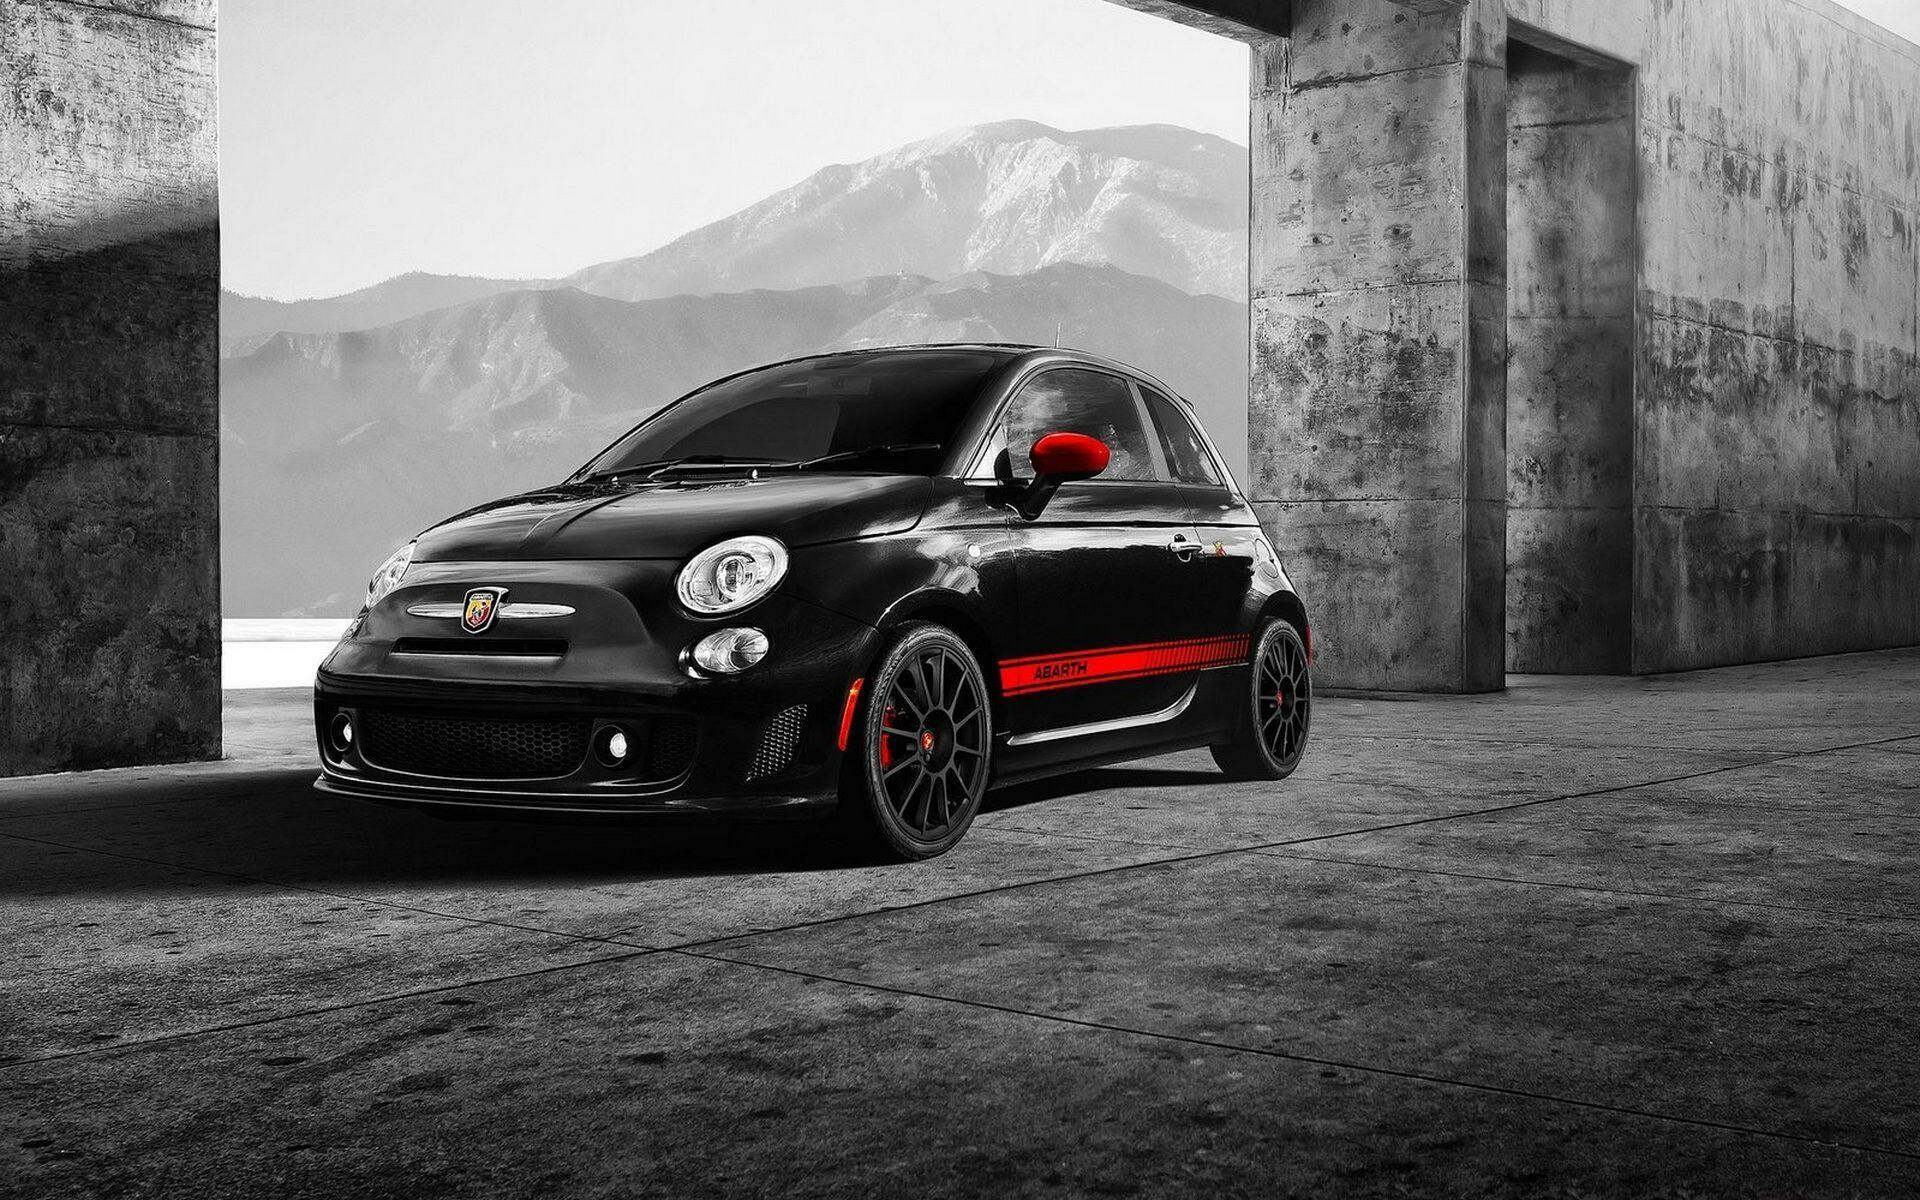 Fiat: Fiat's specialty is small cars, spearheaded by the 500 and its sister models the 500L and 500X. 1920x1200 HD Wallpaper.